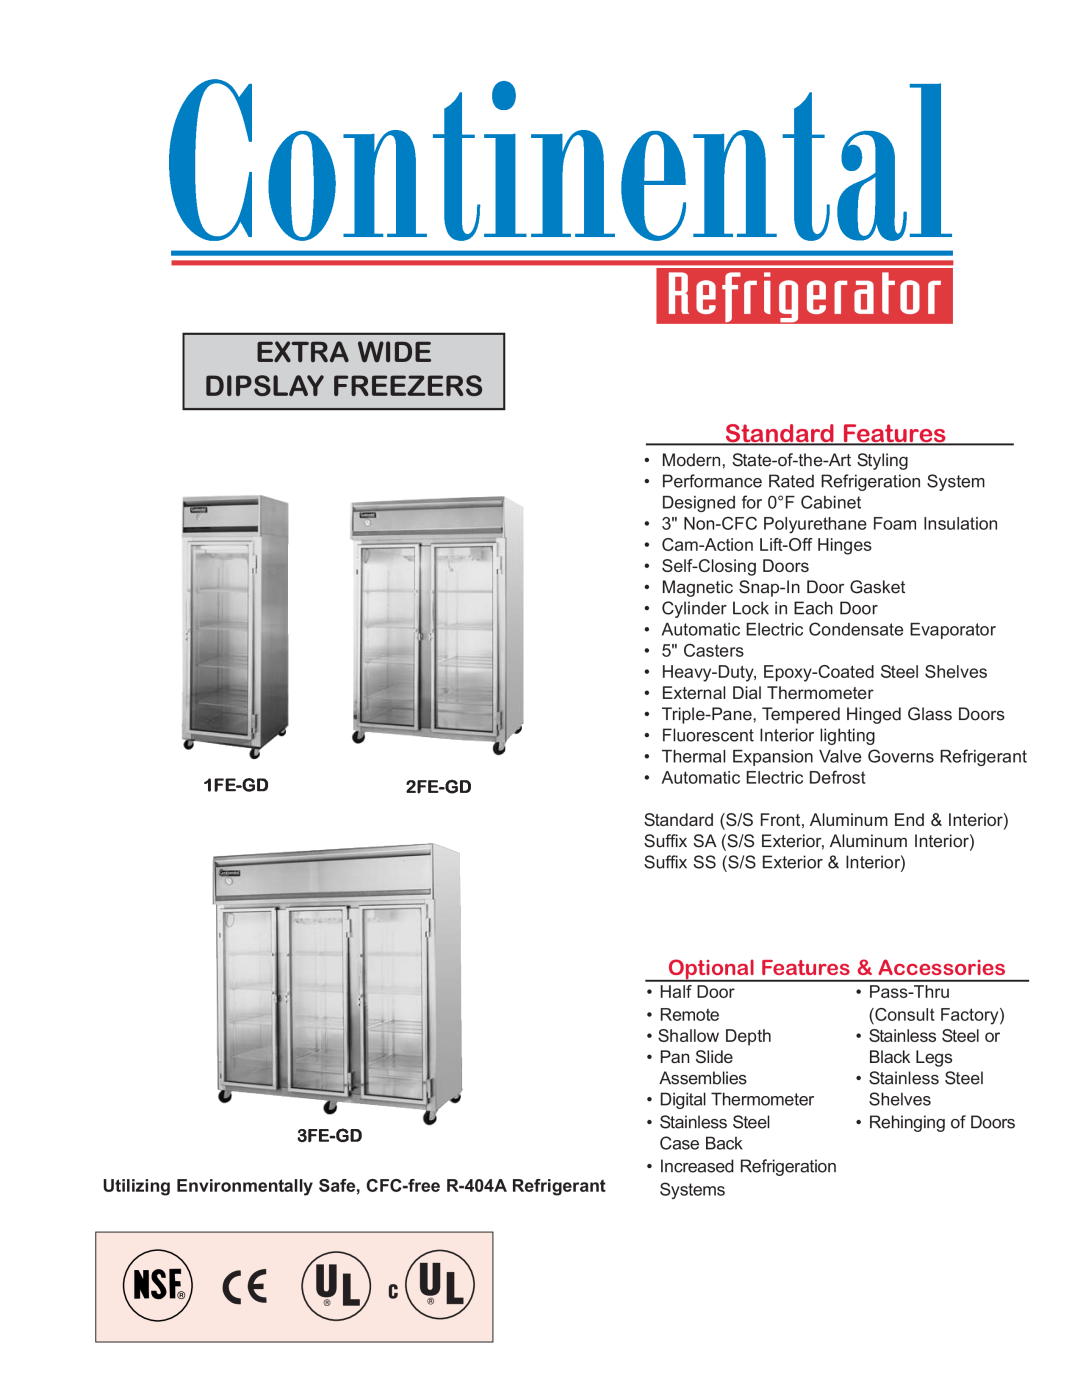 Continental Refrigerator manual 1FE-GD2FE-GD 3FE-GD, Extra Wide Dipslay Freezers, Standard Features 